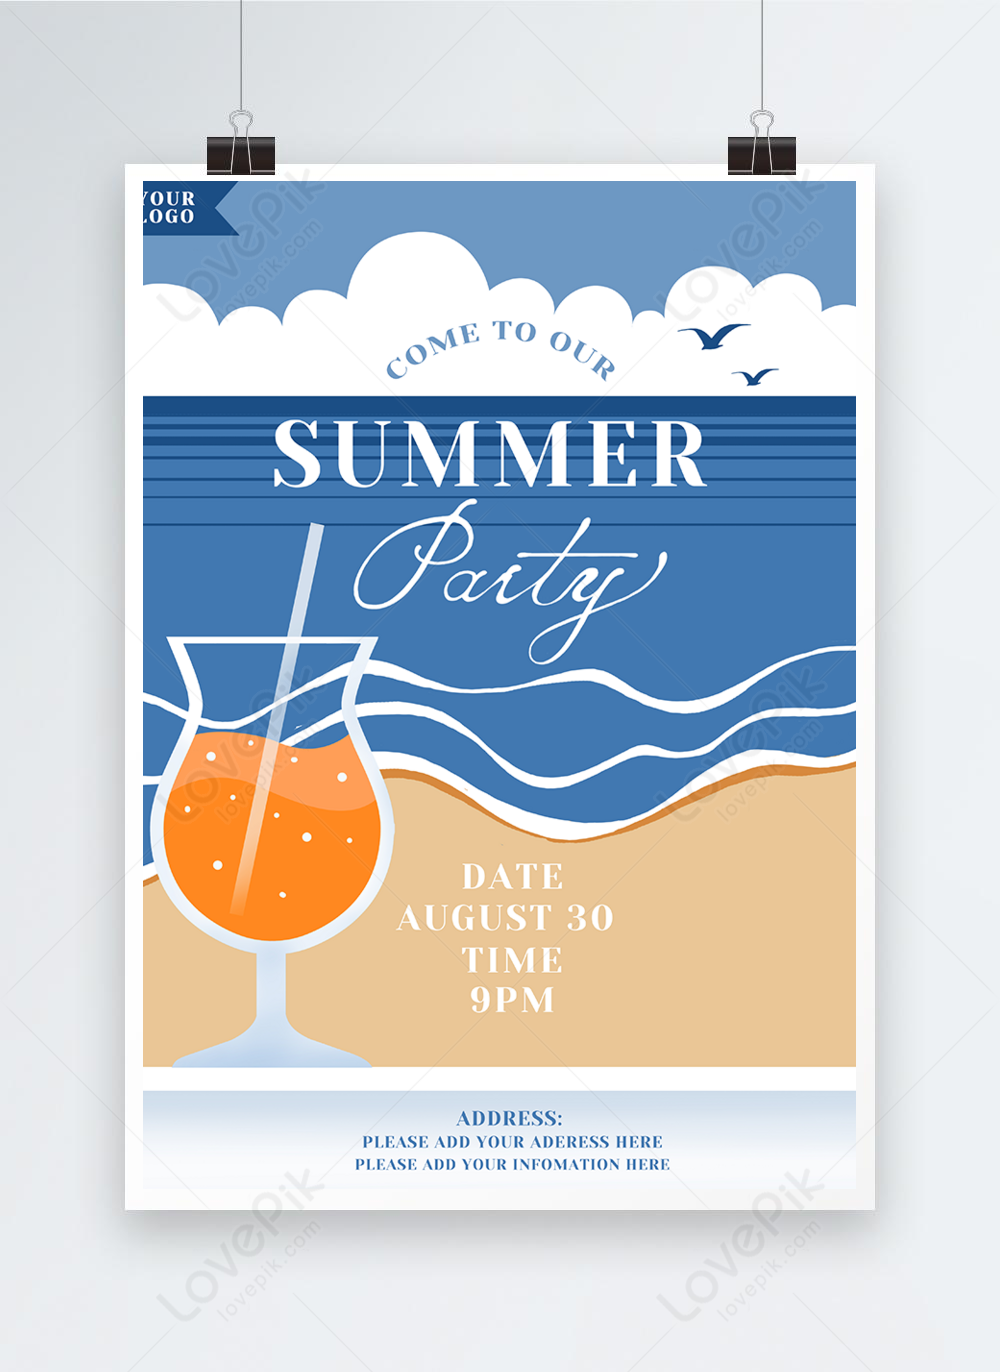 summer-party-poster-template-image-picture-free-download-465392288